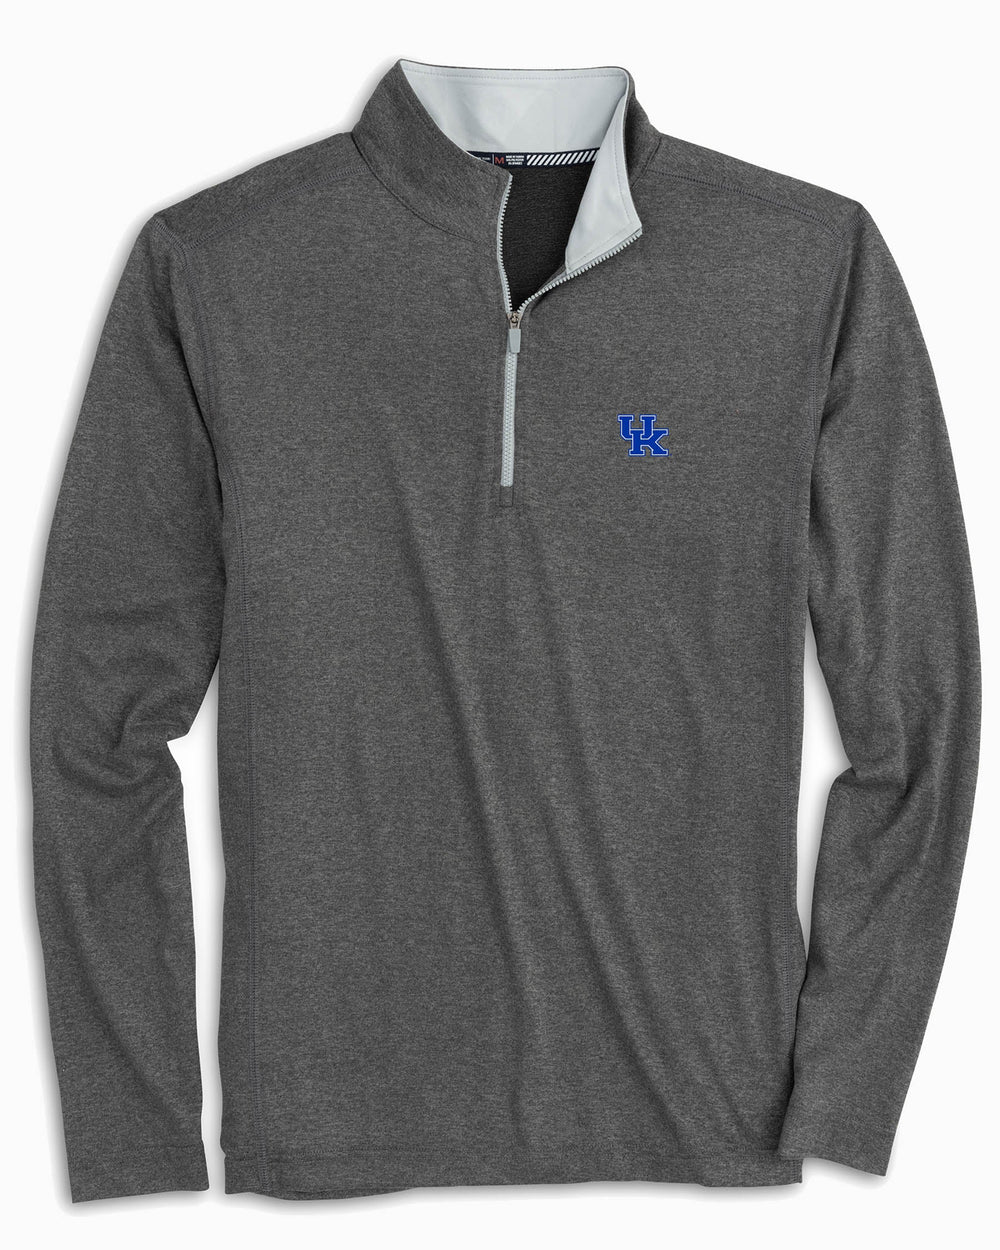 The front view of the Men's Kentucky Wildcats Flanker Quarter Zip Pullover by Southern Tide - Heather Polarized Grey